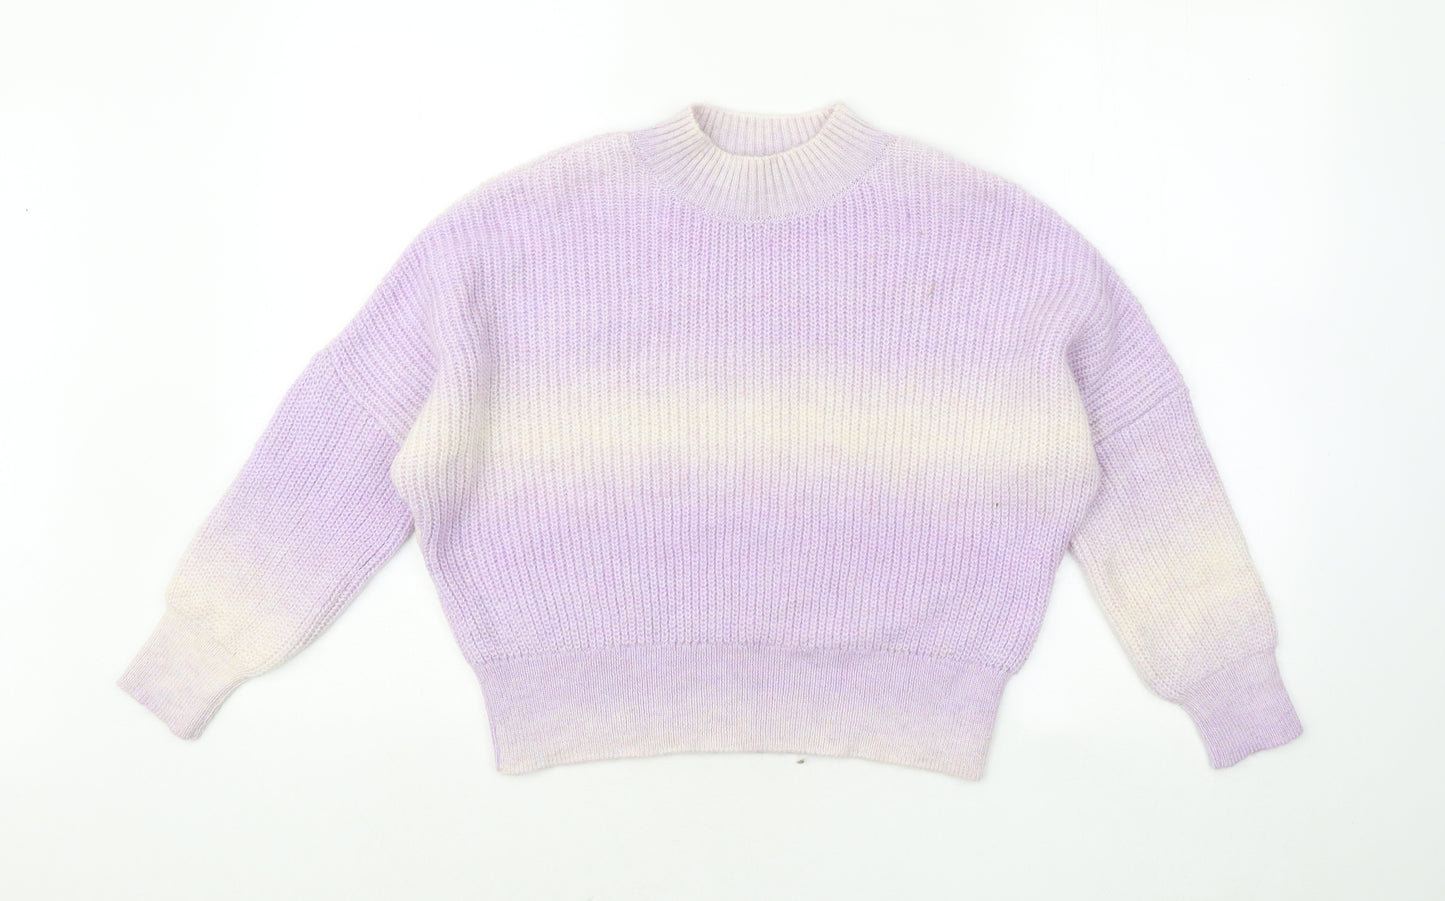 George Girls Purple Mock Neck Geometric Acrylic Pullover Jumper Size 9 Years Pullover